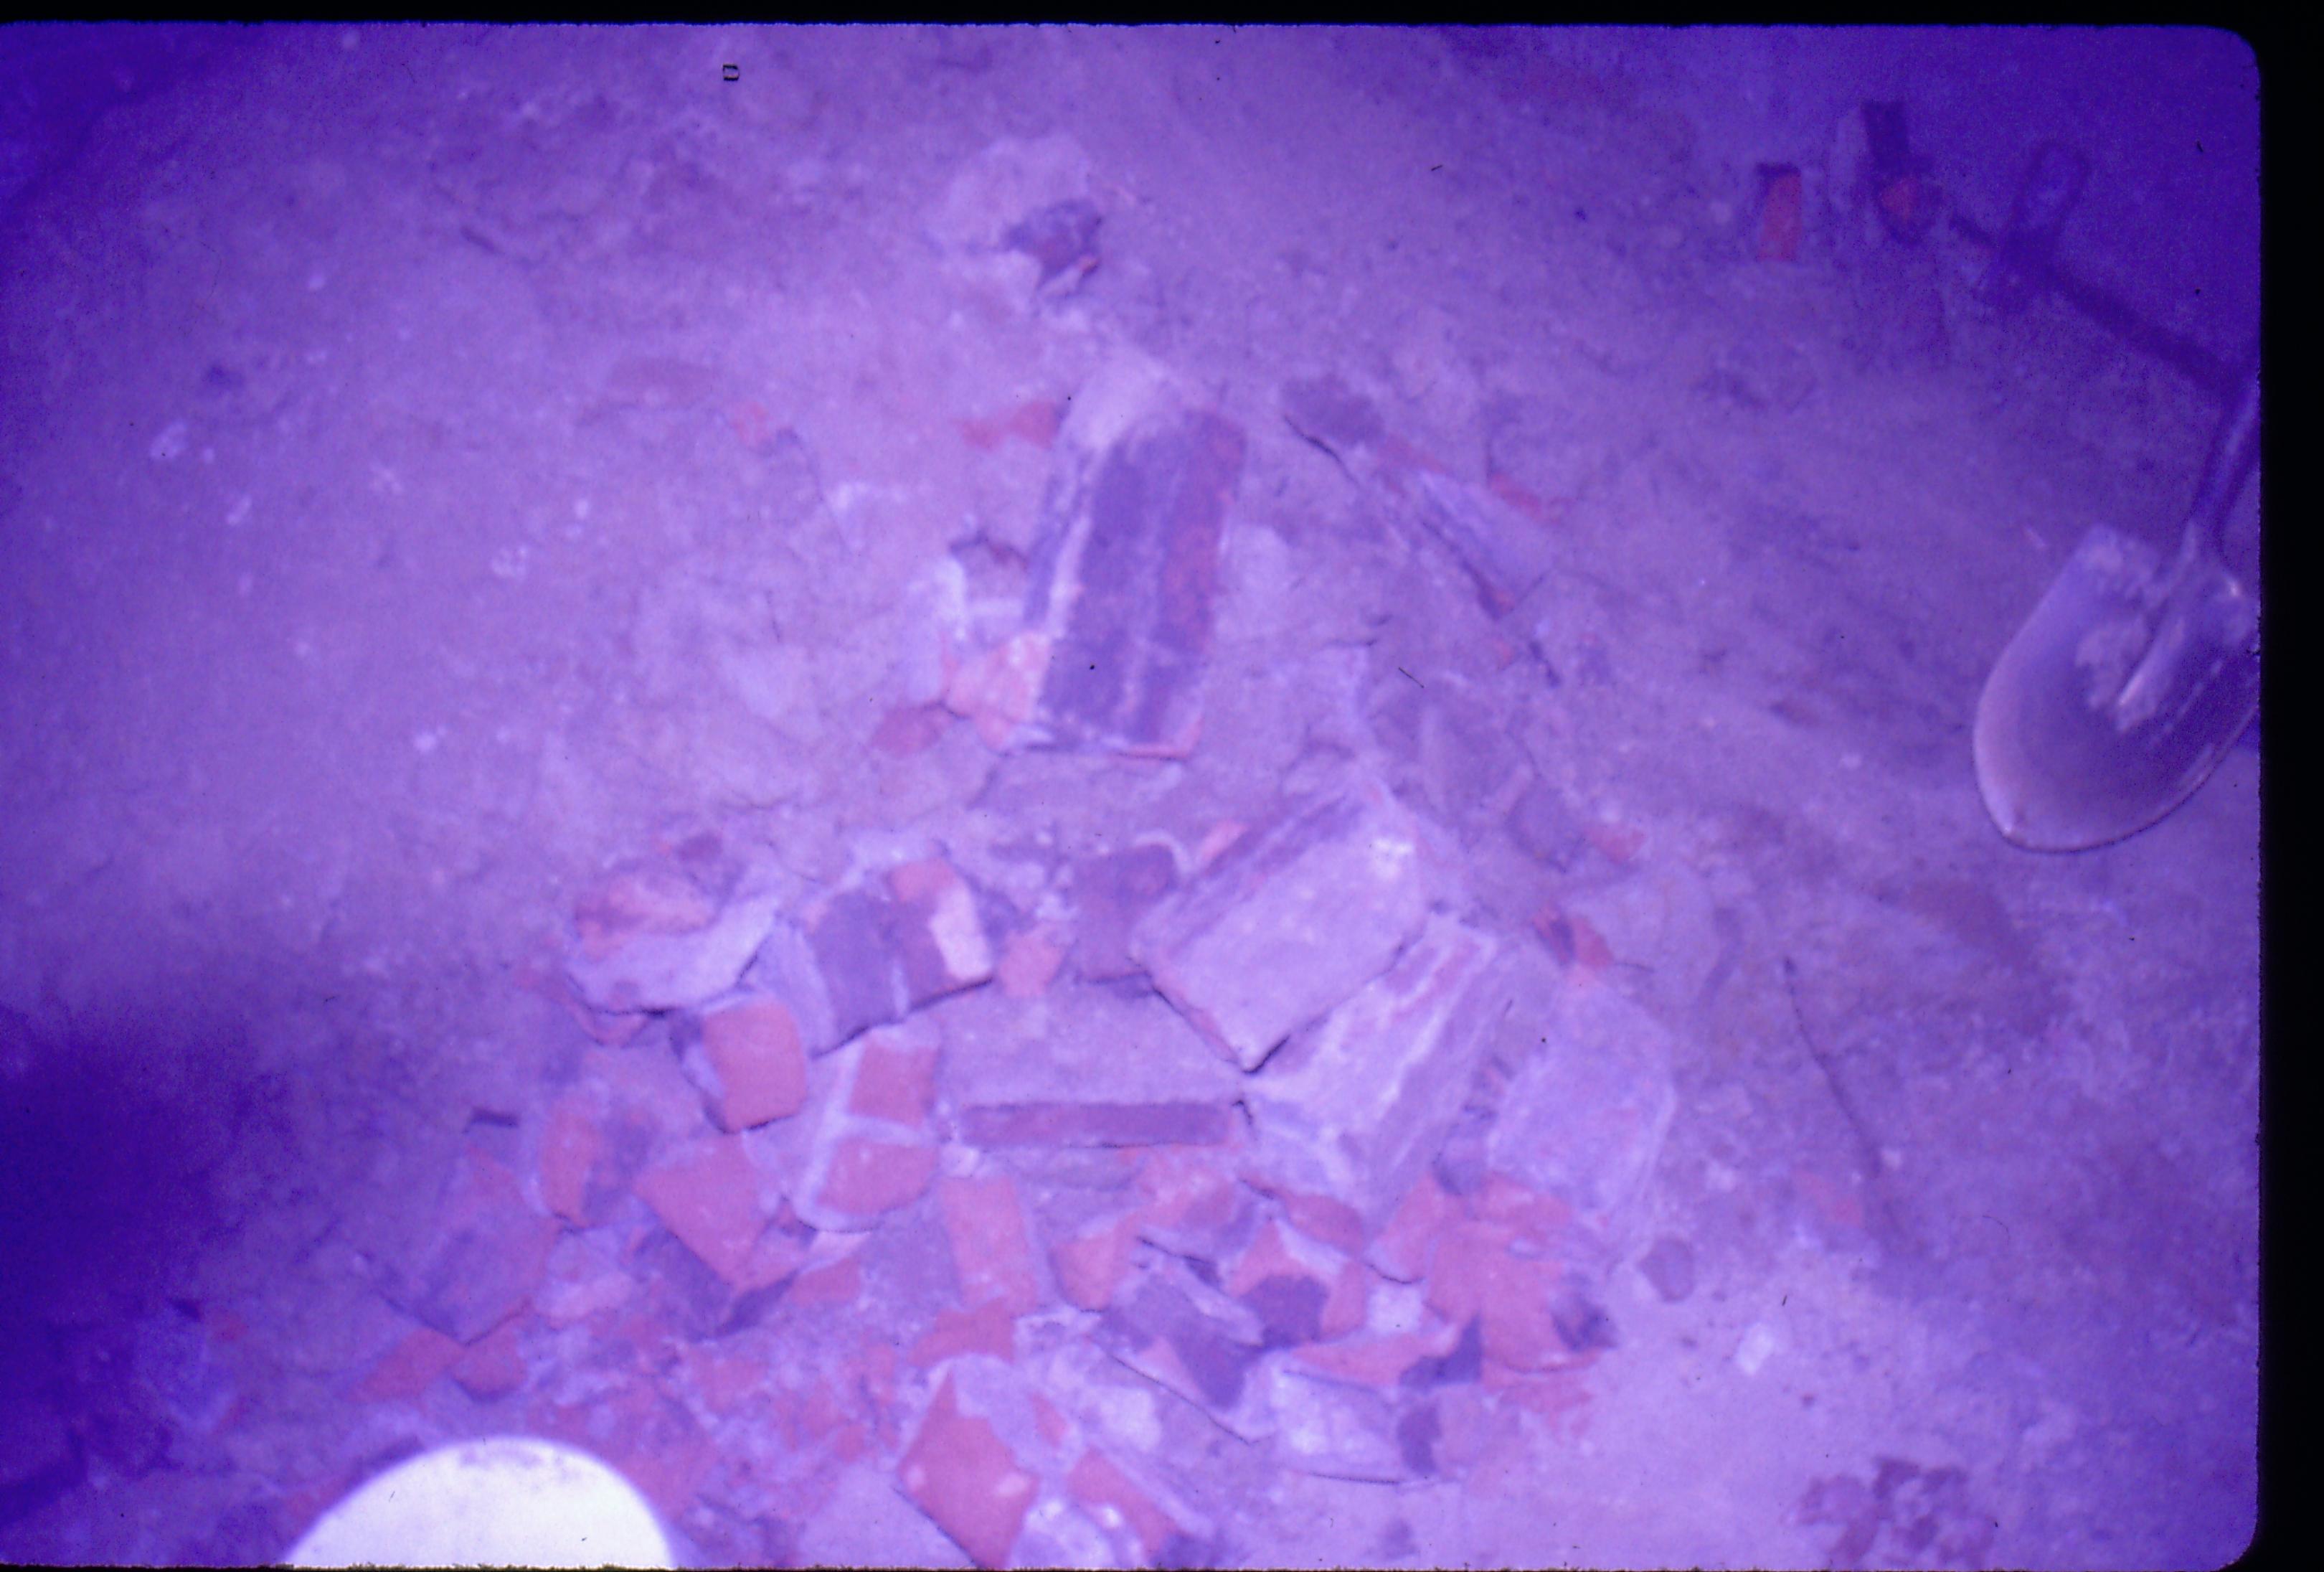 Lyon House - basement, pile of bricks removed from floor. Plastic drain cover in foreground left. Shovel leaning against wall on right. Looking East from basement Lyon, Basement, brick